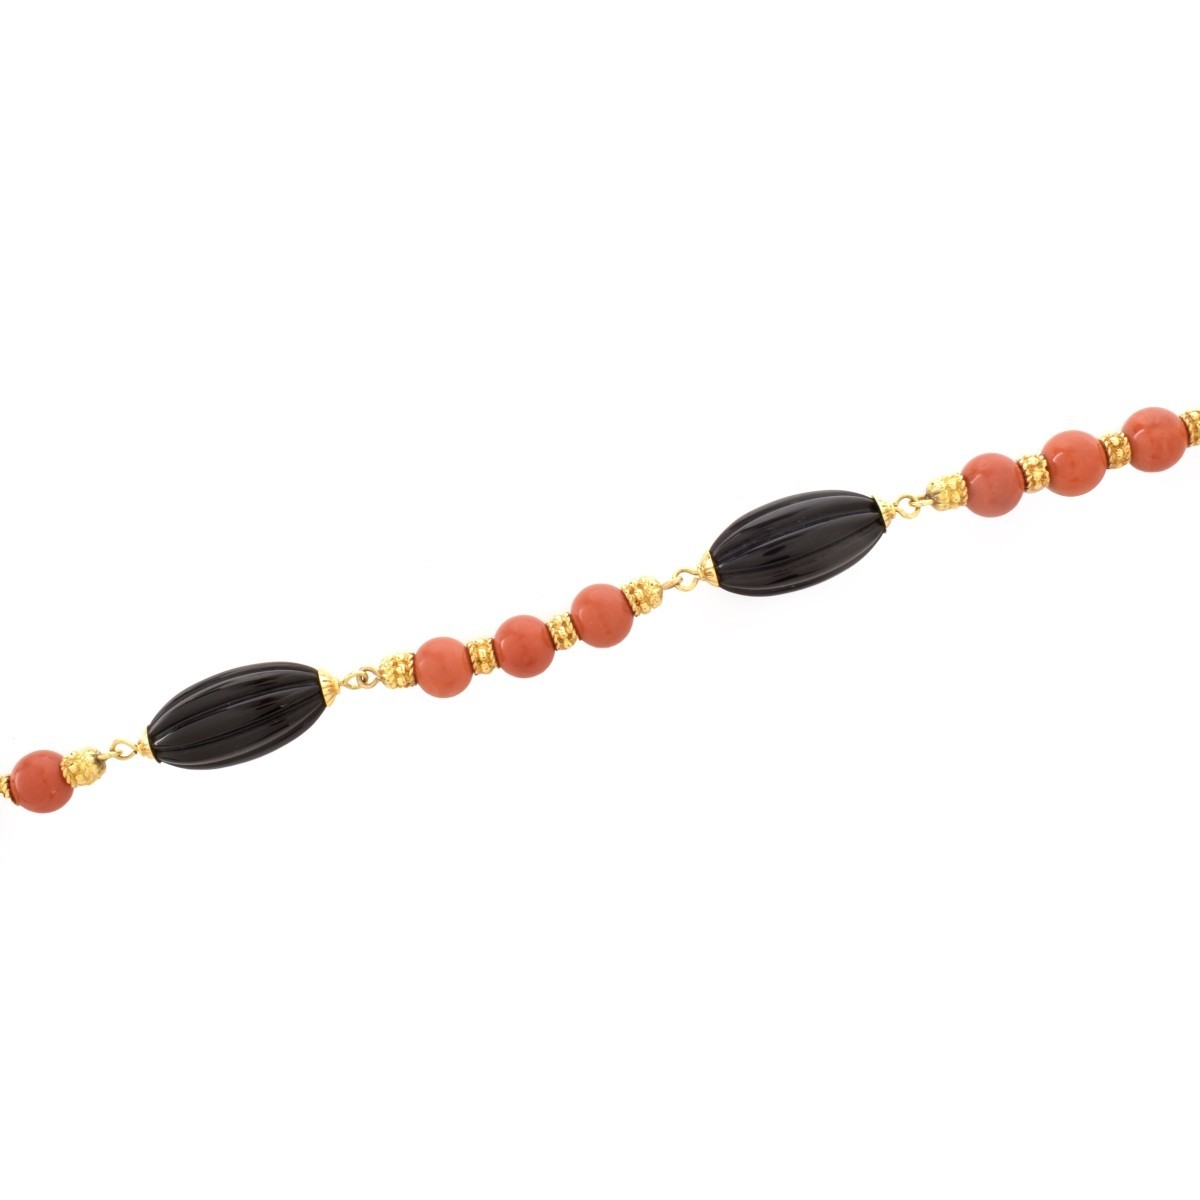 Fred Paris Onyx, Coral and 18K Necklace